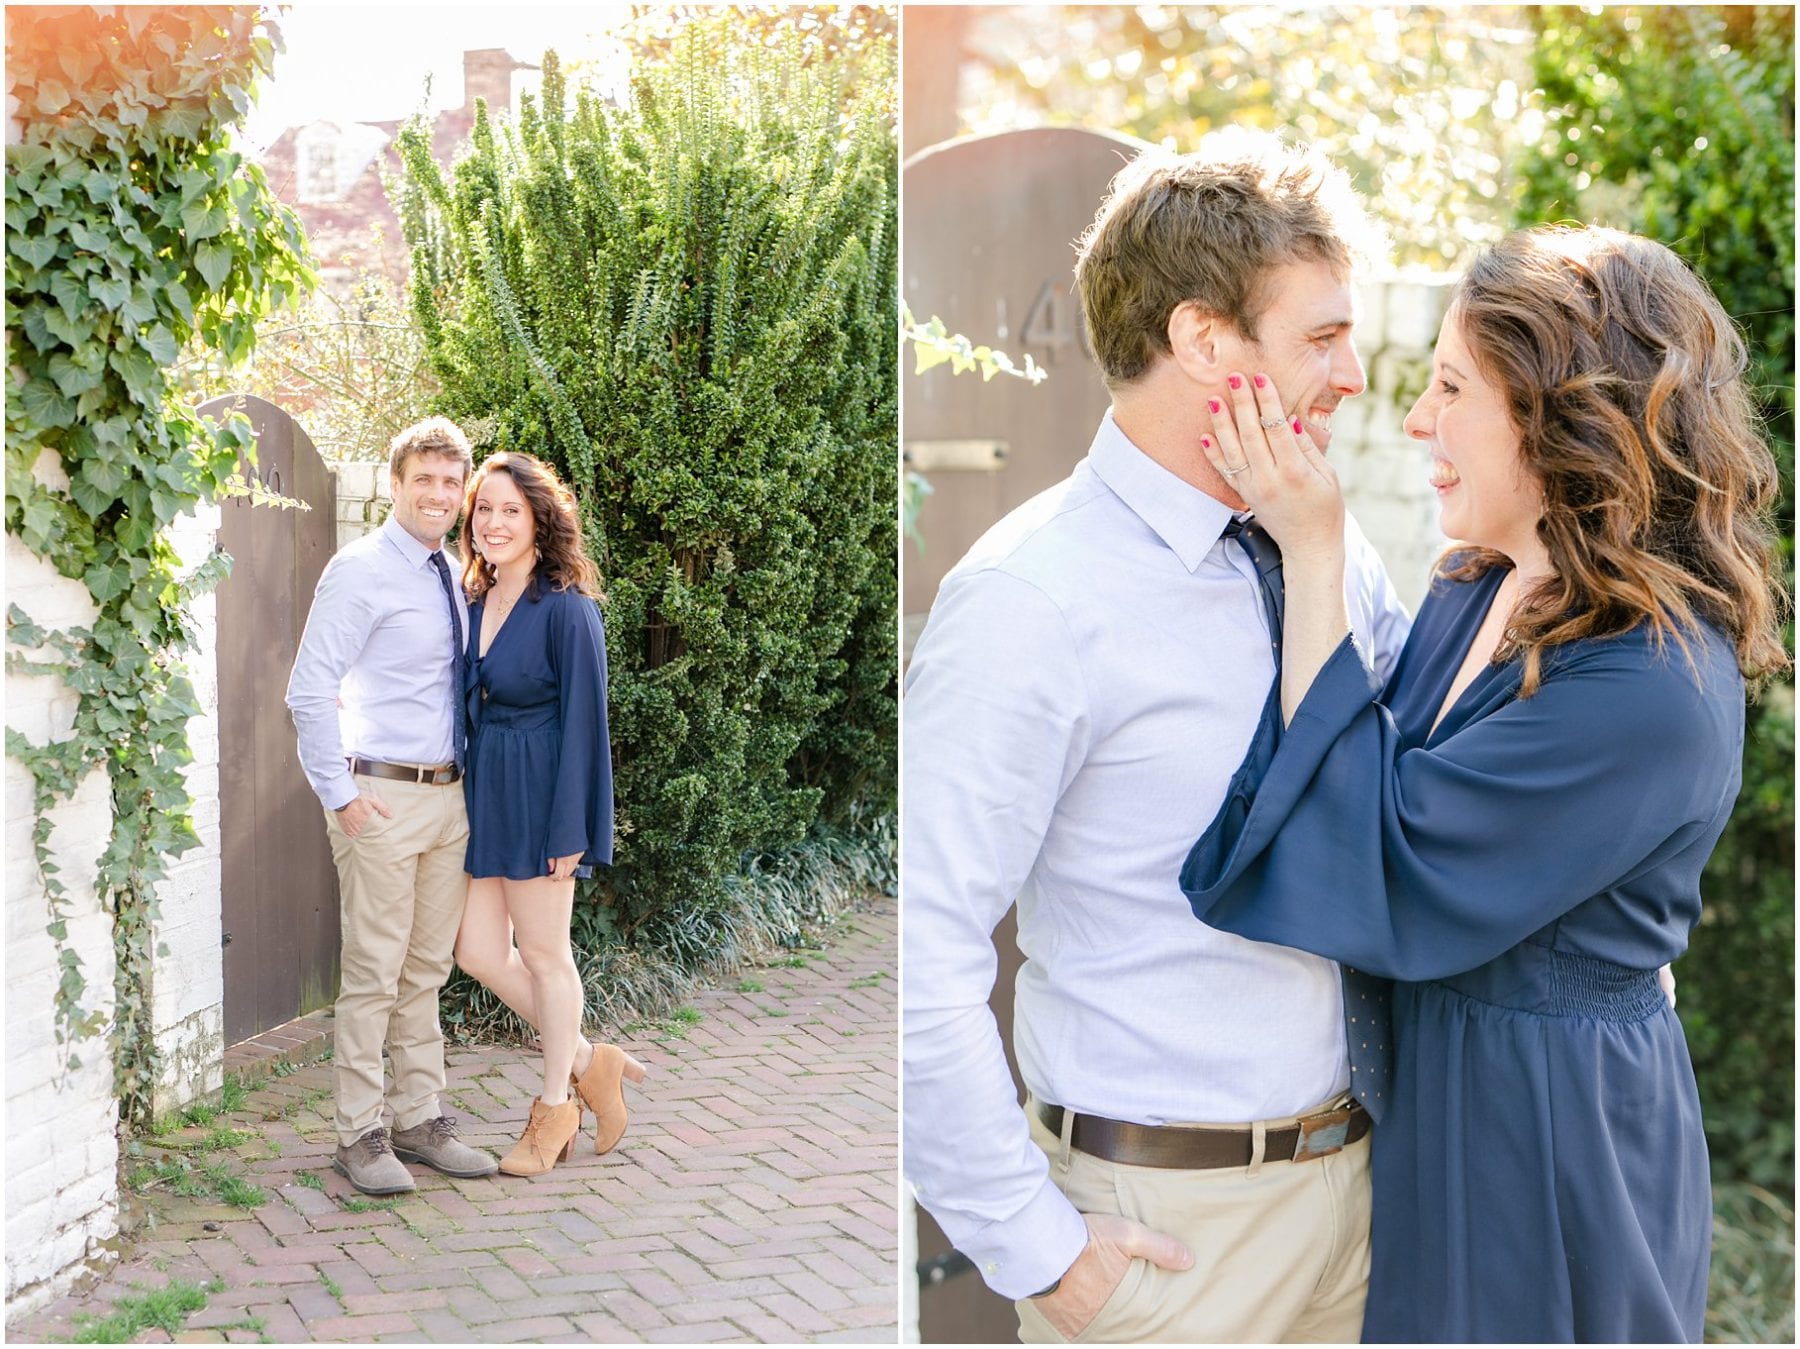 Date Themed Old Town Alexandria Engagement Session Megan Kelsey Photography-4.jpg